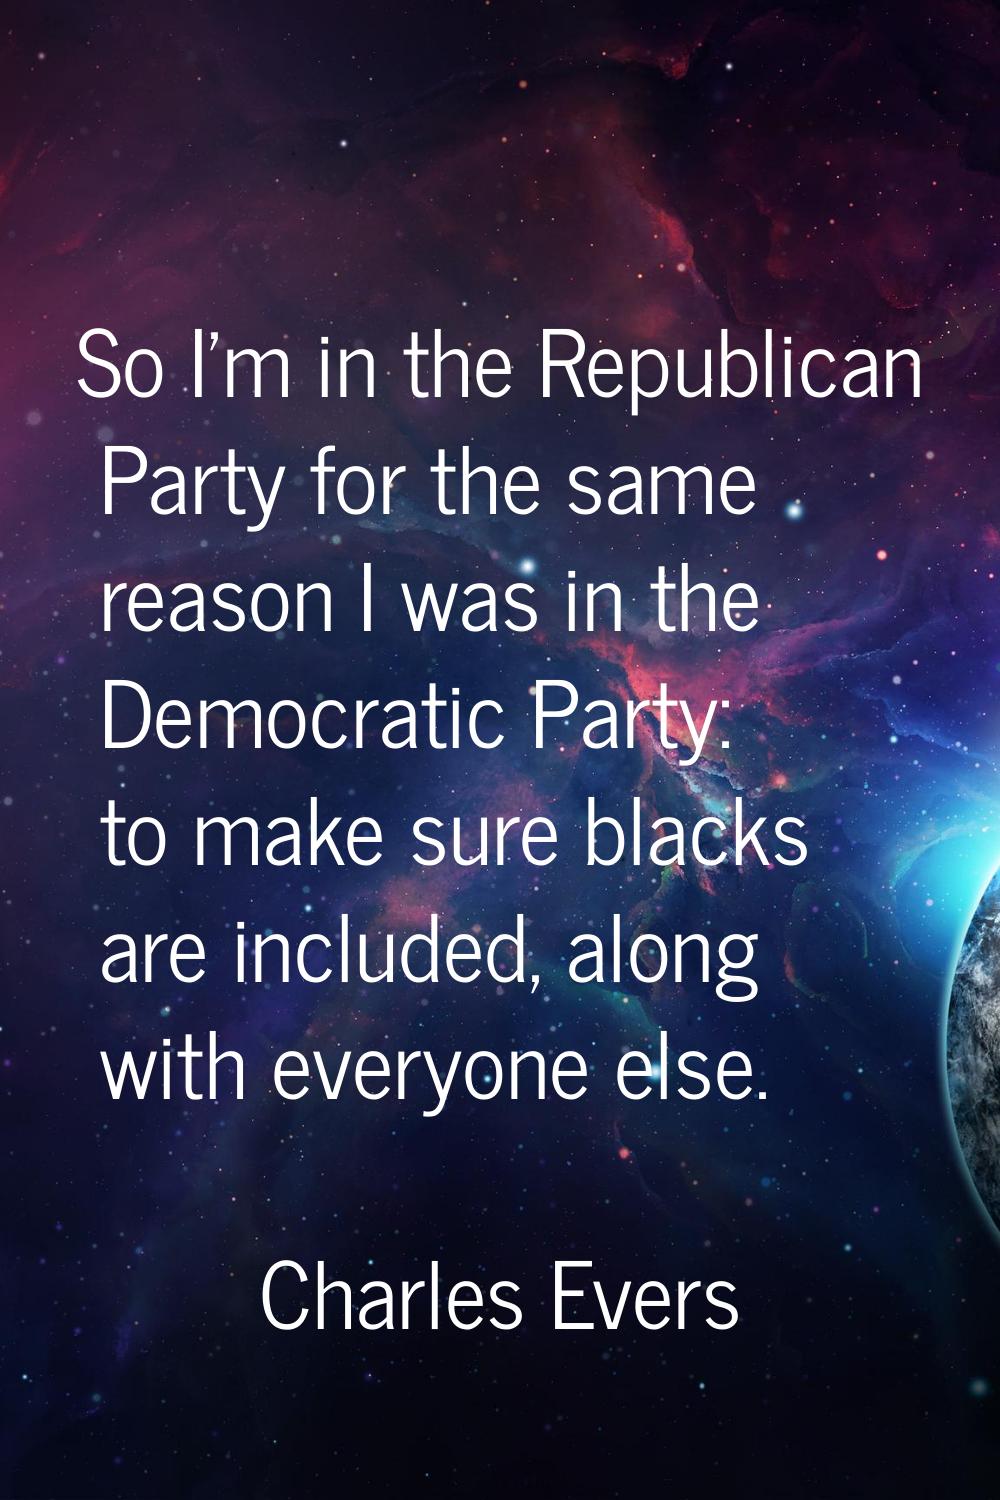 So I'm in the Republican Party for the same reason I was in the Democratic Party: to make sure blac